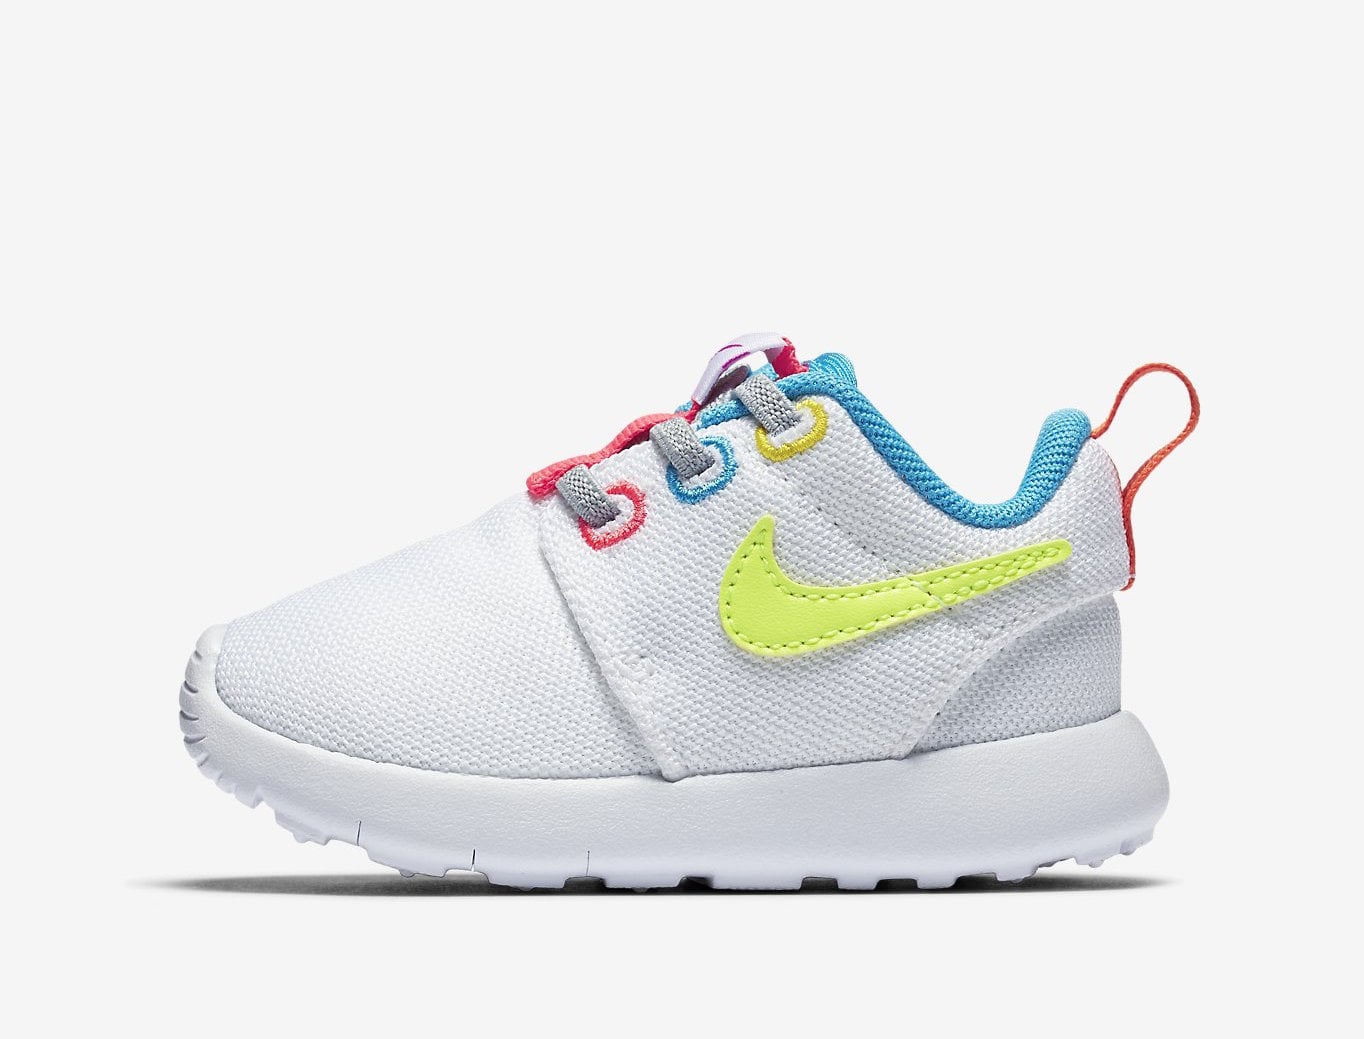 Nike Roshe The Tiniest Baby Your Kids Don't Need, but OMG | POPSUGAR Family Photo 9